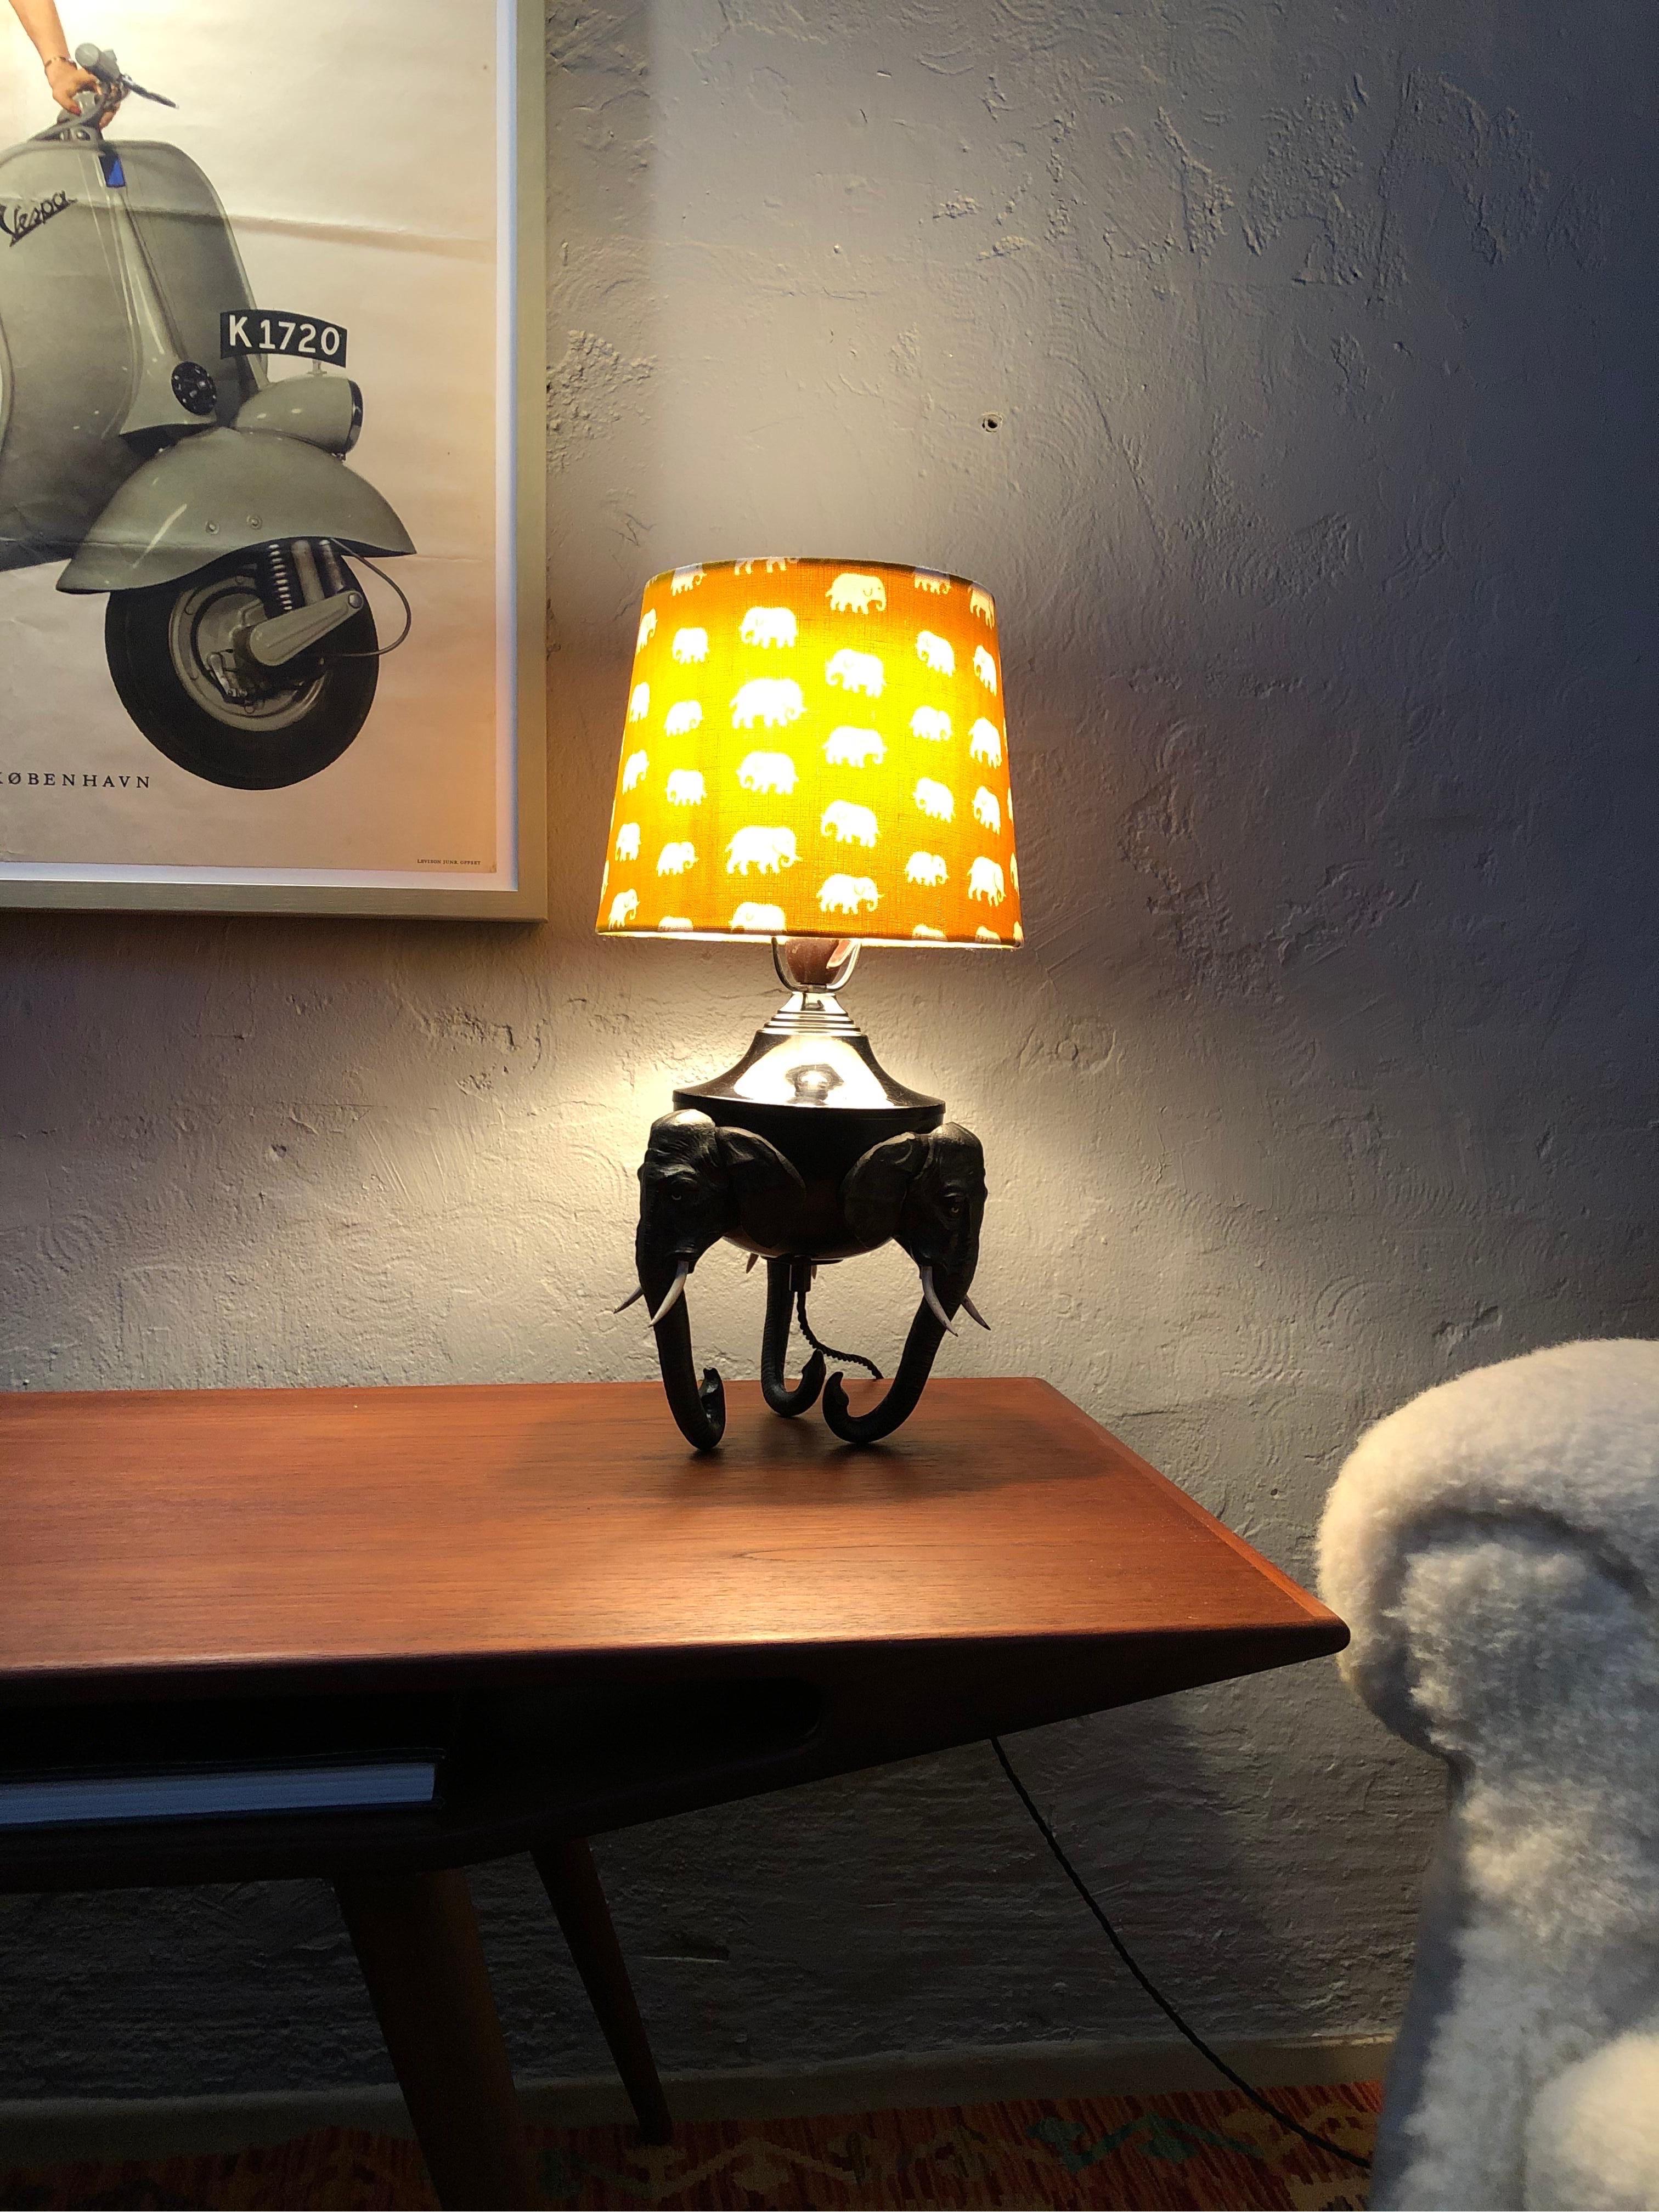 Rare antique elephant lamp from the early 20th century.
Raised on 3 elephant heads.
Original cold painted bronze with a great patina and look to the surface.
Original Bakelite bulb holder rewired with black twisted cloth flex and grounded.
Lampshade